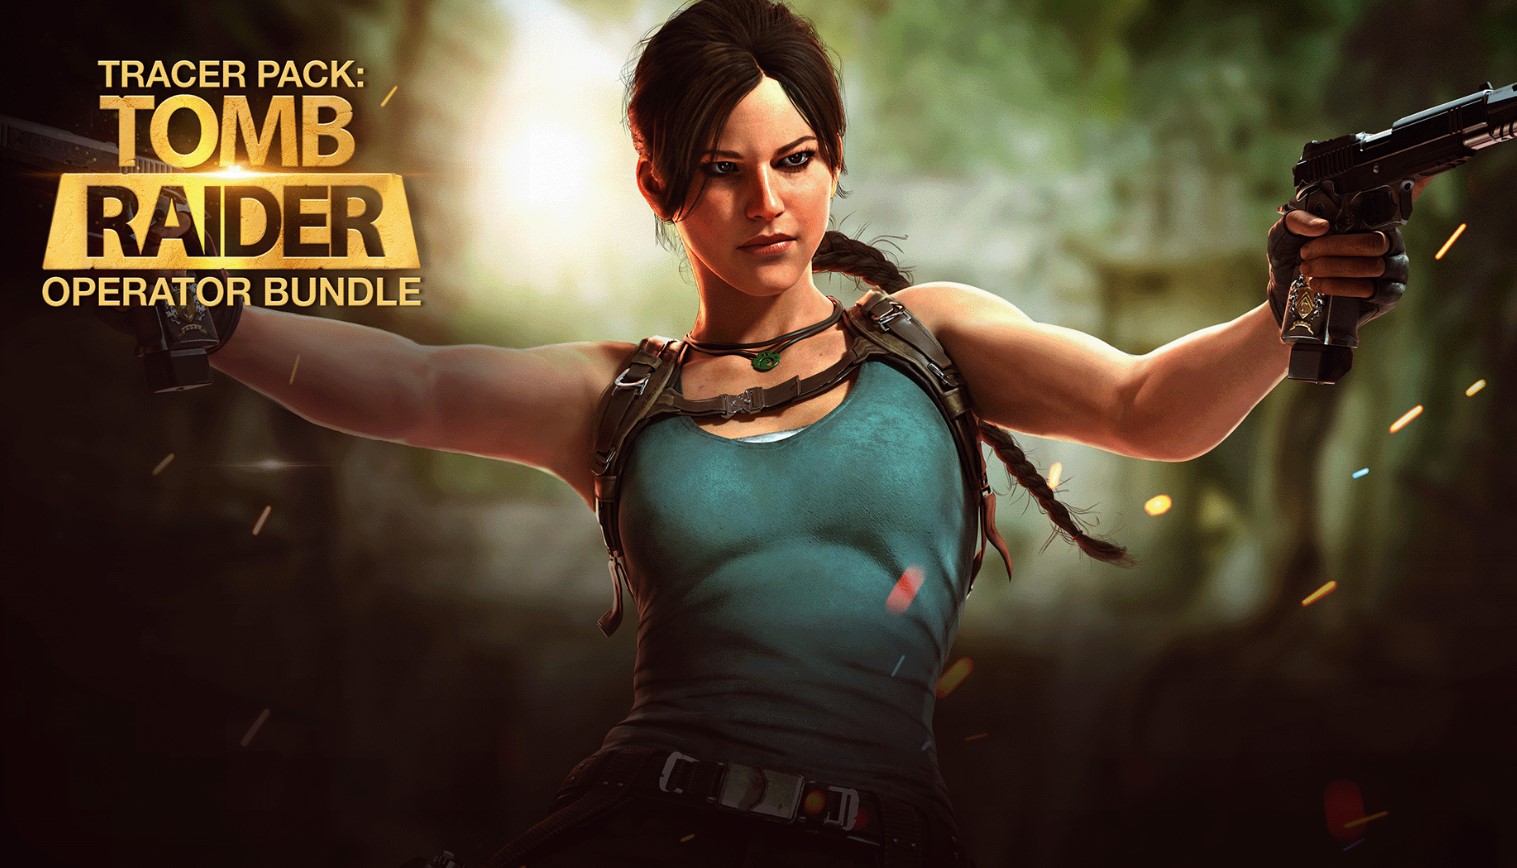 Lara Croft Has A Brand new Video Game Appearance, But It Might Never Come in Tomb Raider 1